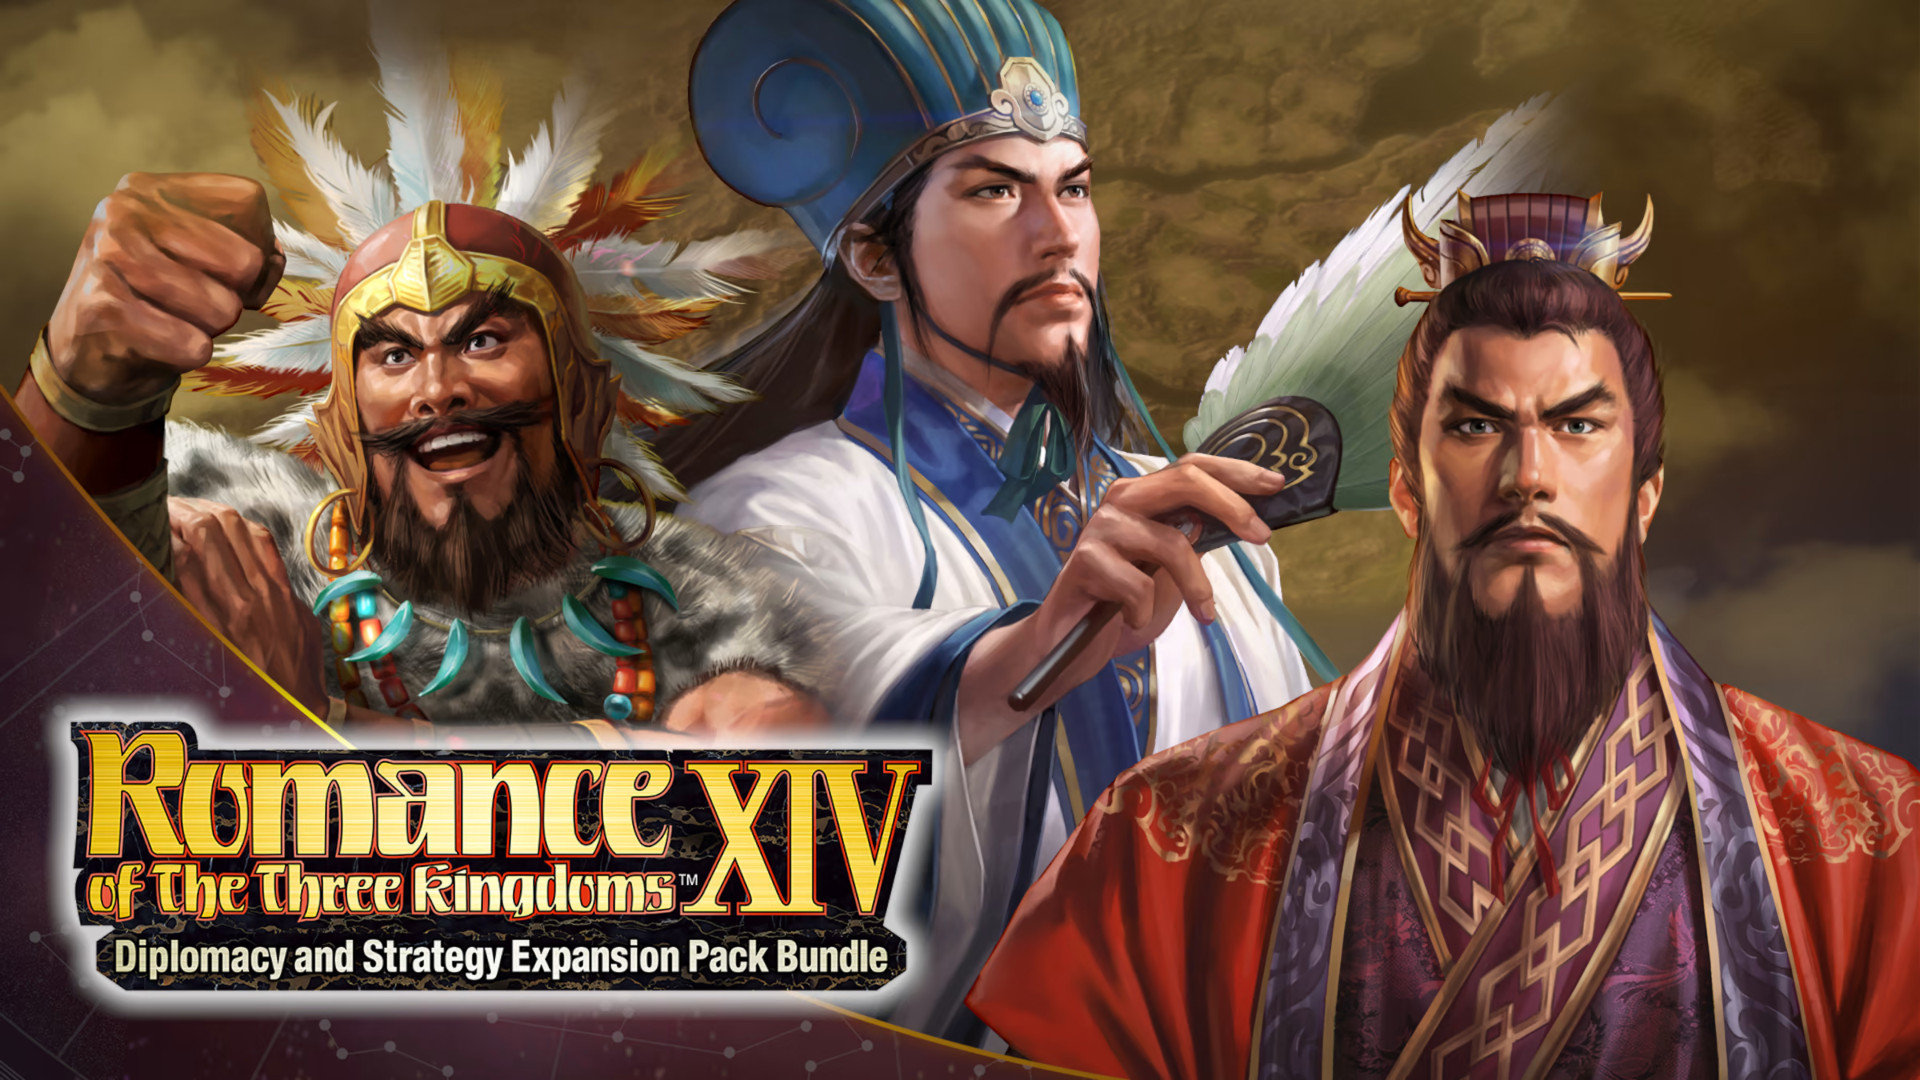 Romance of the Three Kingdoms XIV - Diplomacy and Strategy Expansion Pack DLC Steam CD key, 39.55 usd